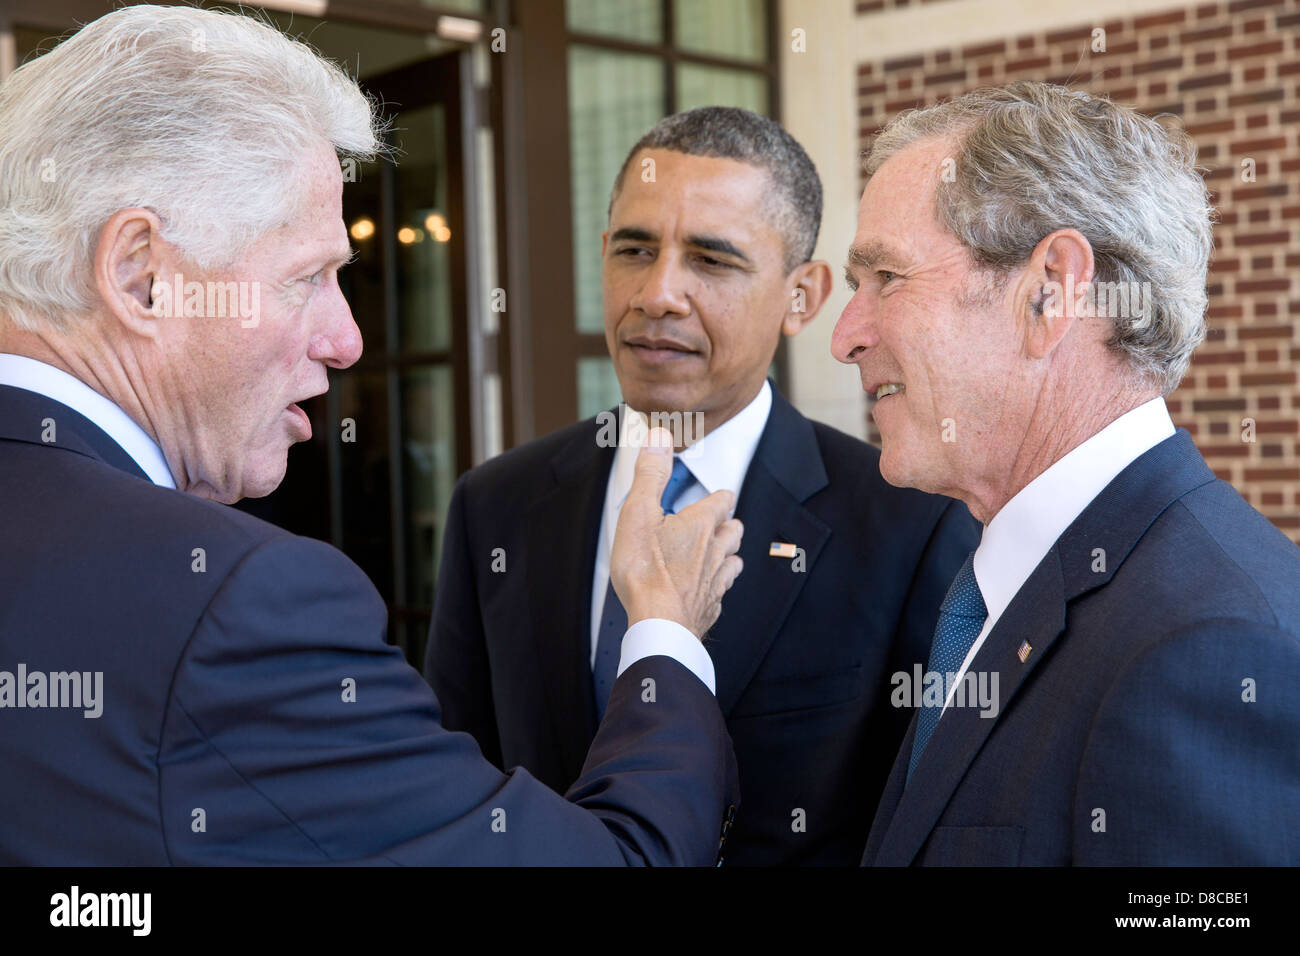 US President Barack Obama talks with former Presidents Bill Clinton and George W. Bush before a luncheon at the George W. Bush Presidential Library and Museum on the campus of Southern Methodist University April 25, 2013 in Dallas, Texas. Stock Photo